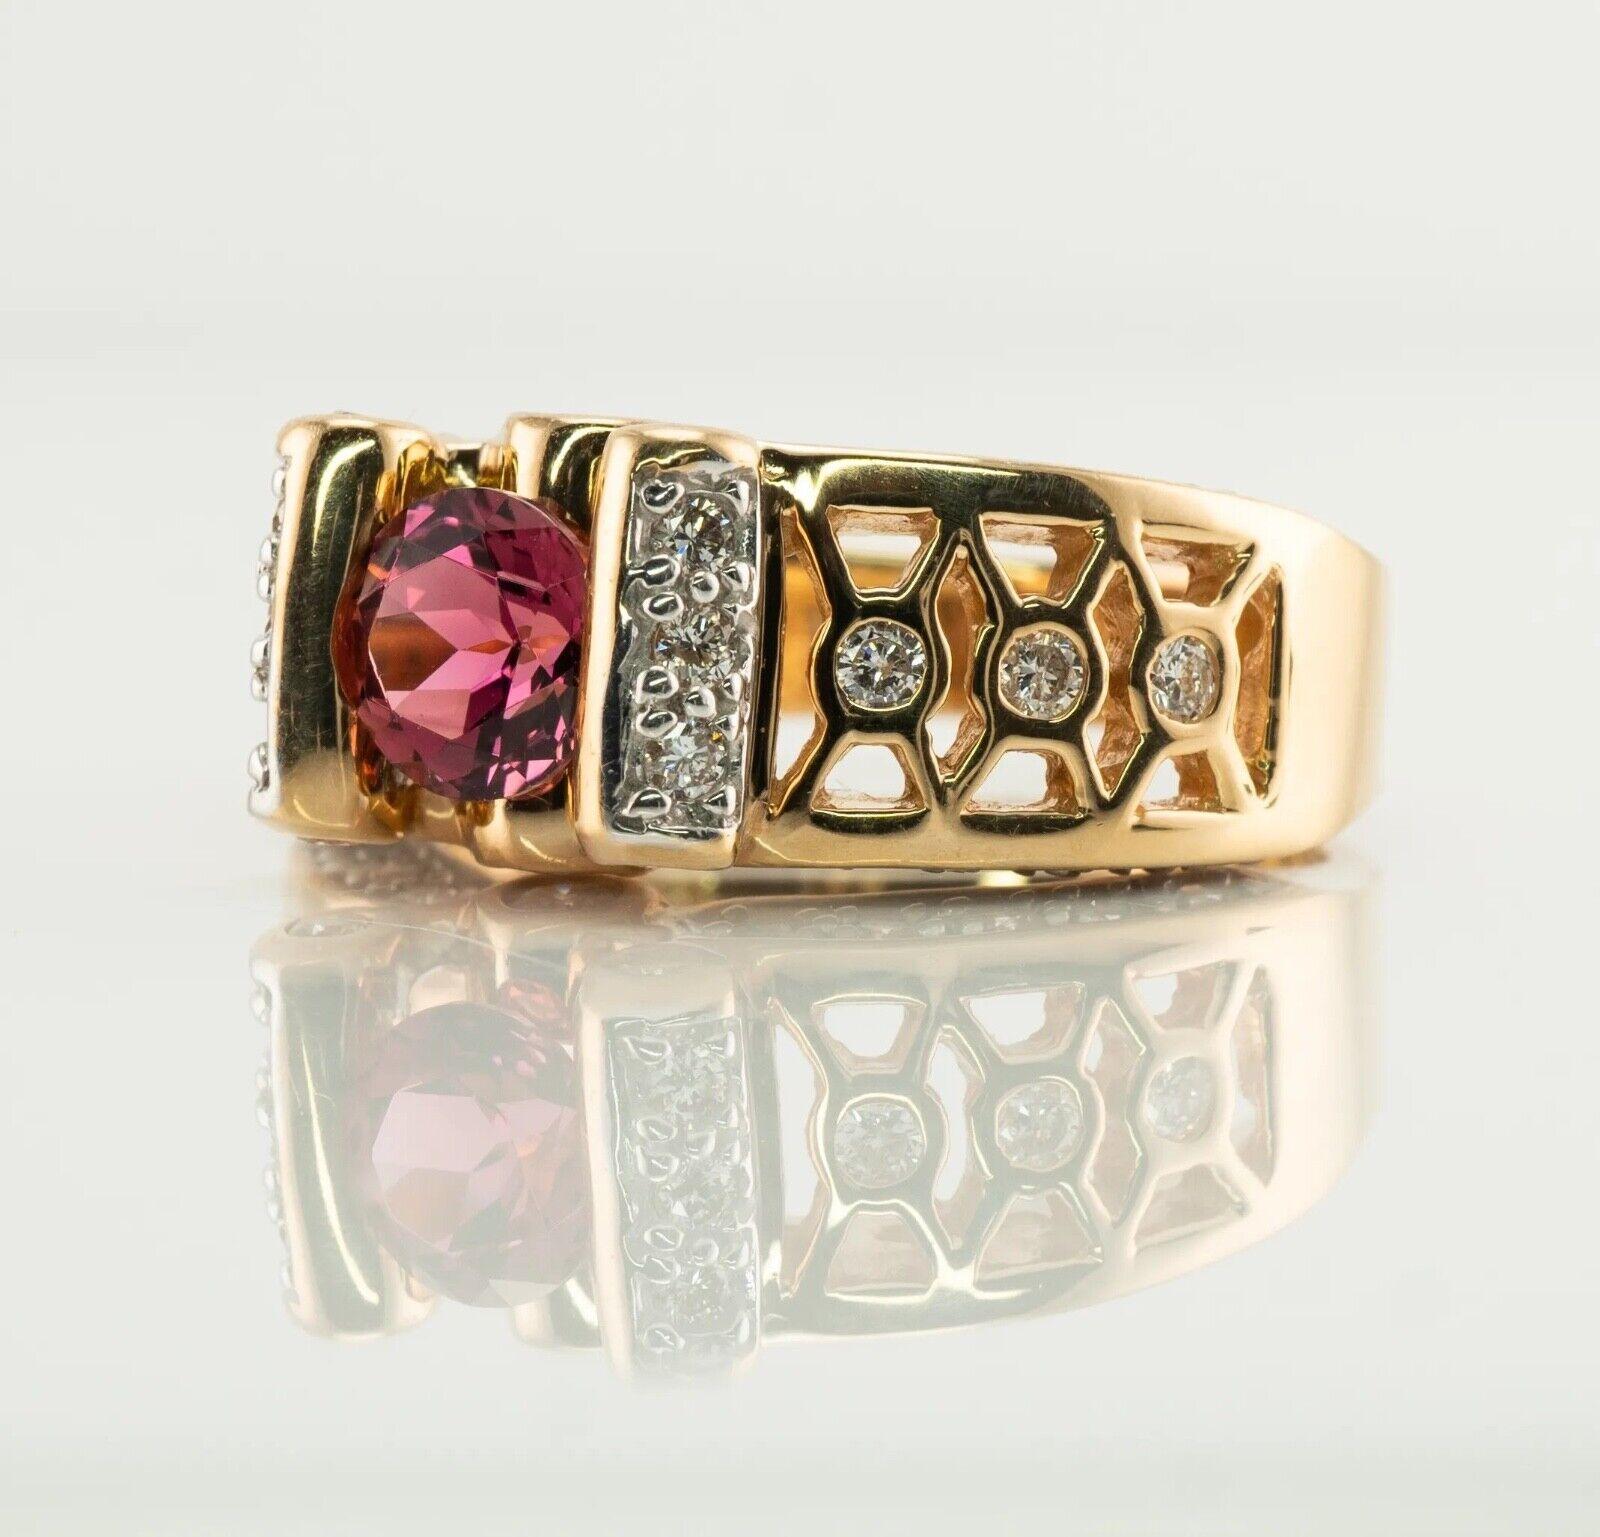 This estate ring is finely crafted in solid 14K Yellow Gold and set with genuine Earth mined Pink Tourmaline and diamonds.
The Tourmaline is 6mm (.75ct) and this is a very clean gem of great intensity and strong brilliance.
Thirty eight natural